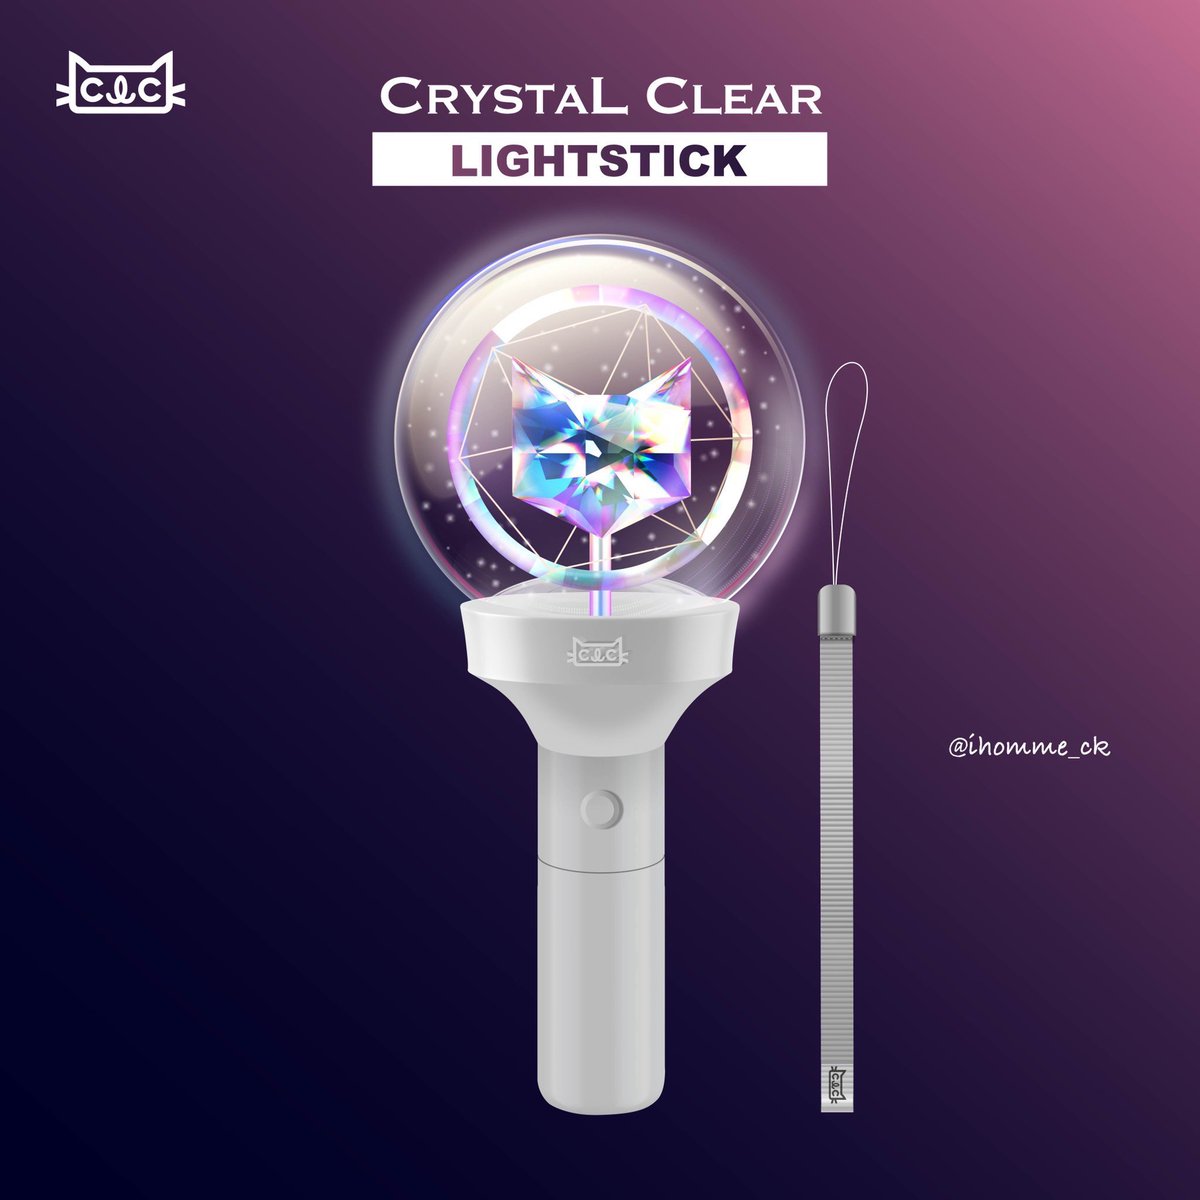 Udsæt bestå velsignelse clc source on Twitter: "I have never seen such a demand for a lightstick 😳  @cubeunited are you seeing this? @CUBECLC @sssorn_clc #CLC #Cheshire  #CLC_Lightstick #CLClightstick #씨엘씨 🤍 https://t.co/KwNDHBKDl7" / Twitter